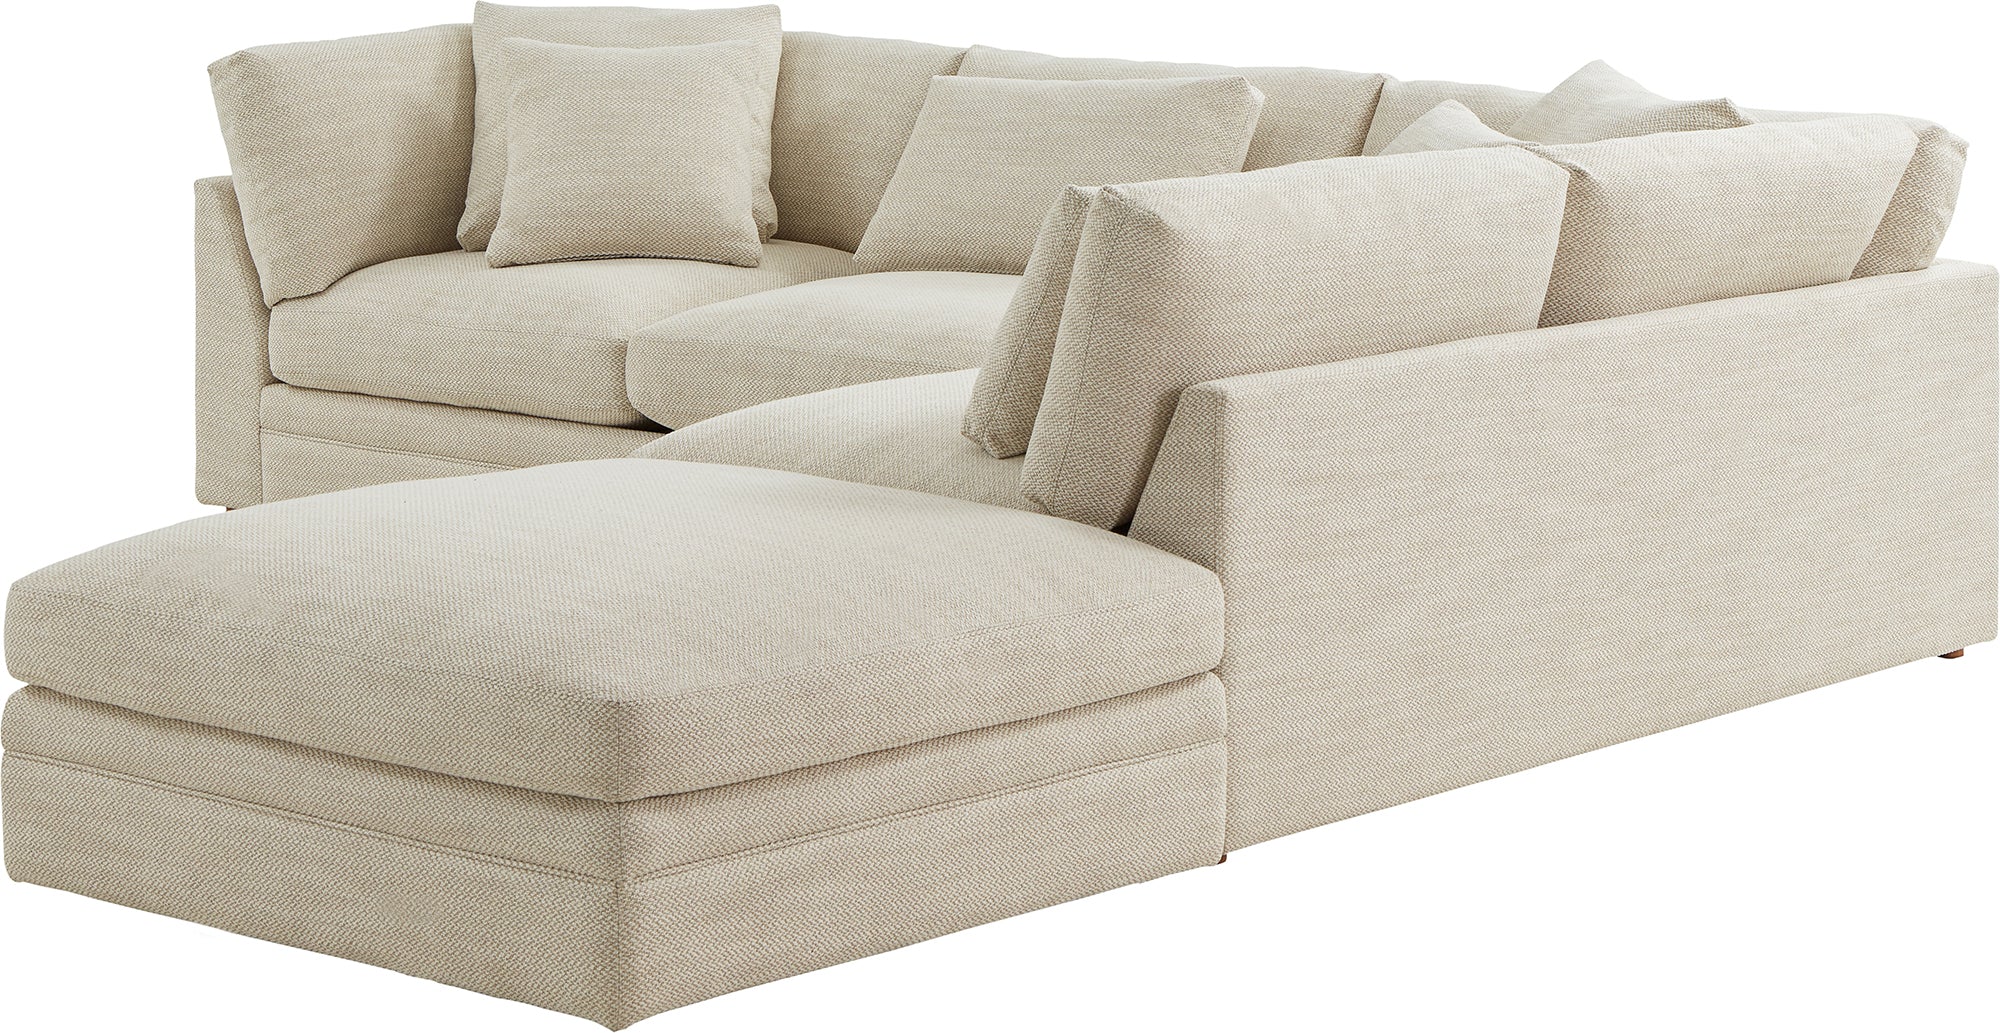 Feel Good Sectional with Ottoman, Right, Oyster - Image 5